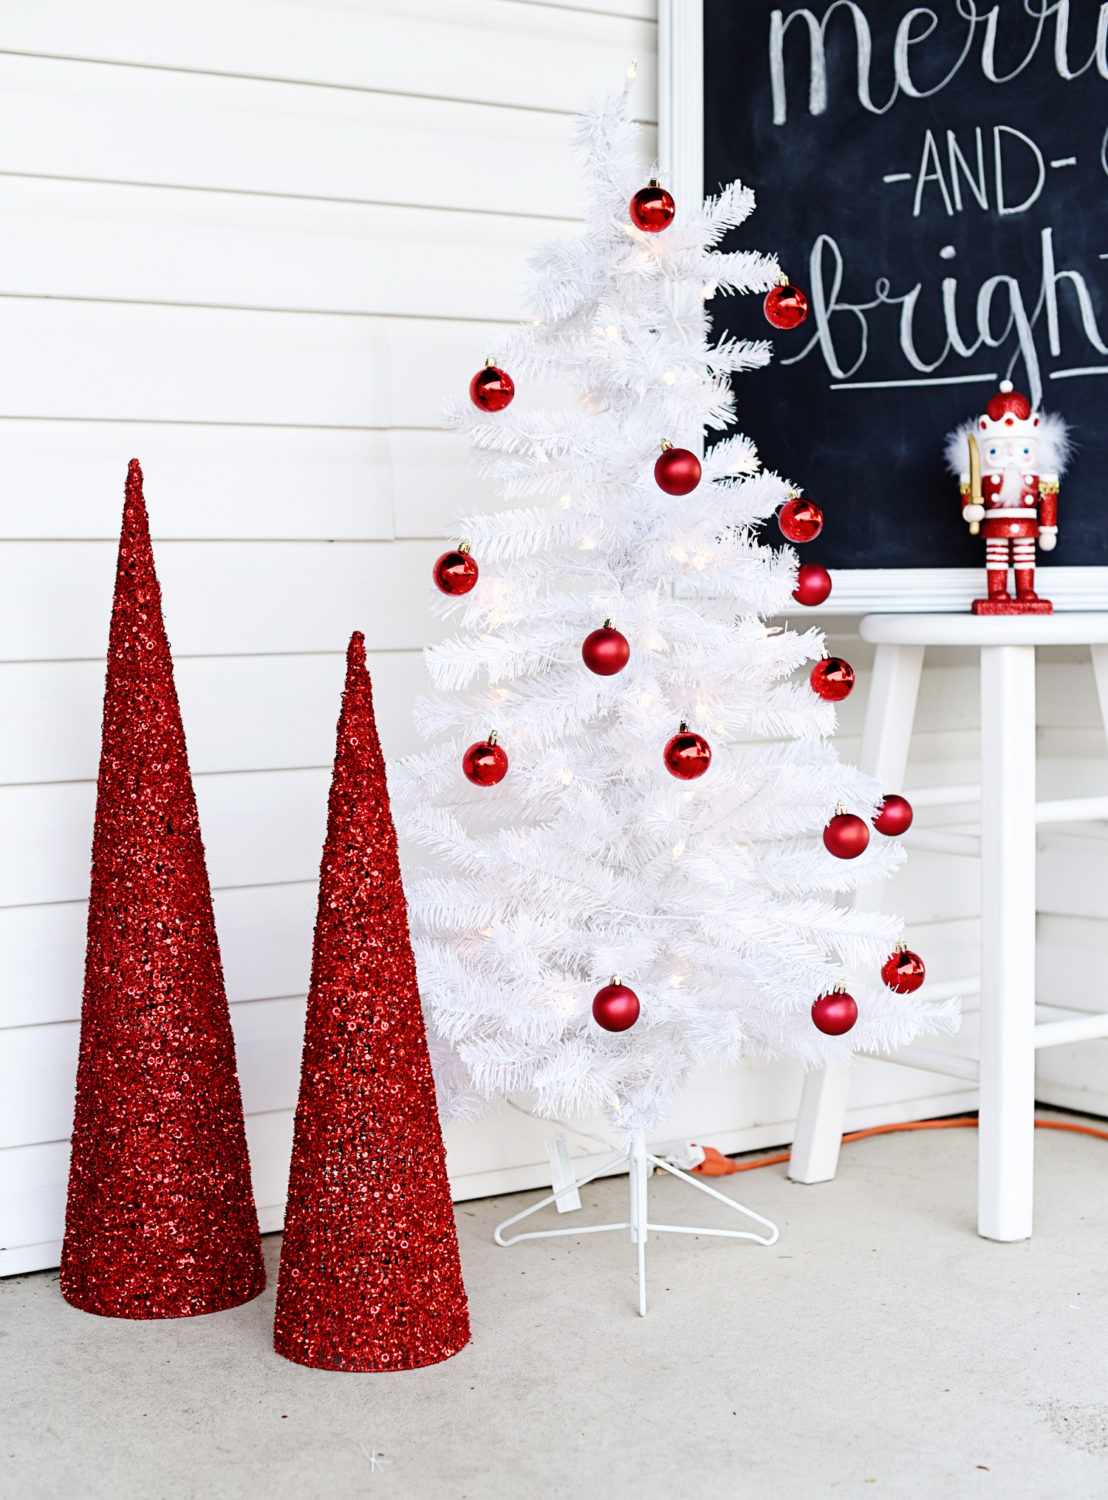 Christmas Front Porch Decor- When you're doing some holiday decorating, don't forget your front porch! Turn your front porch into a festive Christmas display with these simple and frugal decorations. 